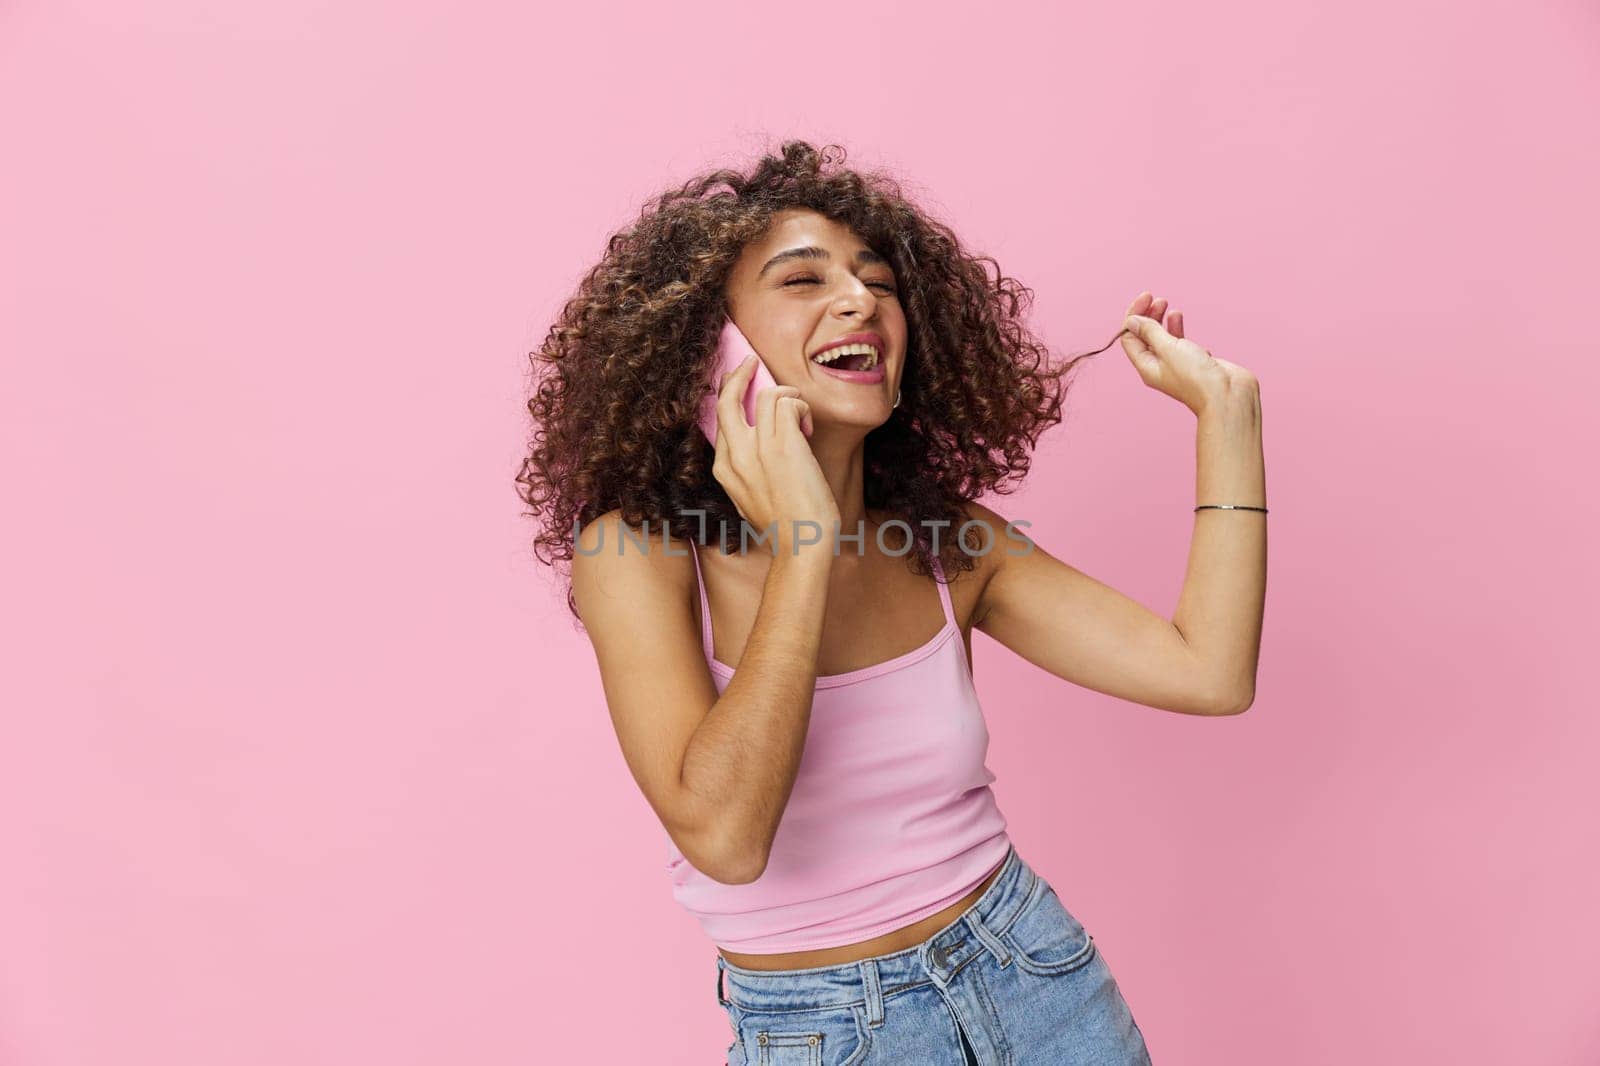 Woman with curly afro hair talking in pink top and jeans on pink background, smile, happiness, copy space. High quality photo